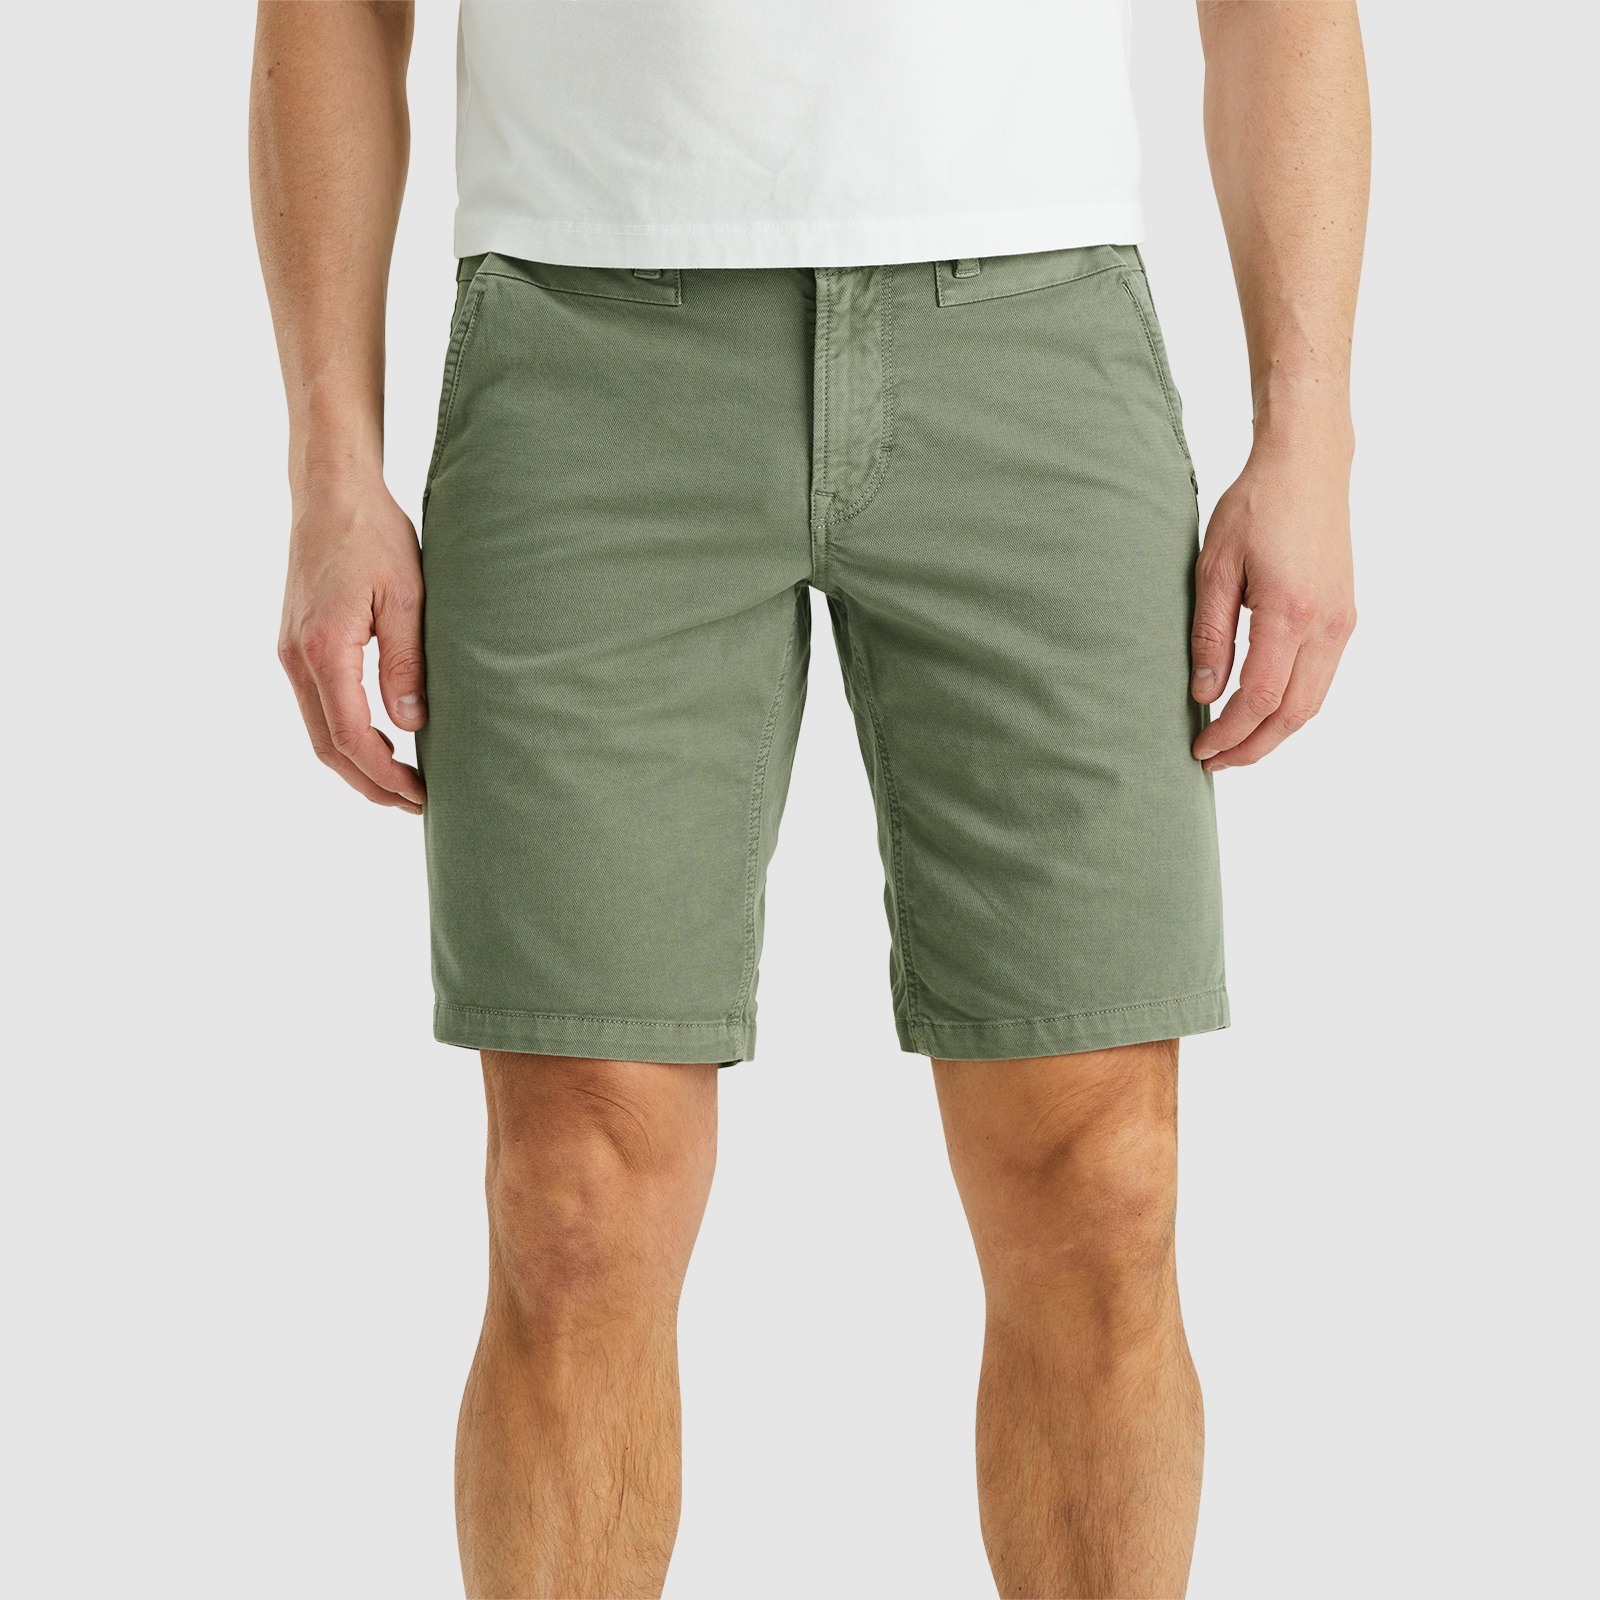 PME Legend TWIN WASP CHINO SHORTS FANCY STRUCTURED Grijs-1 1